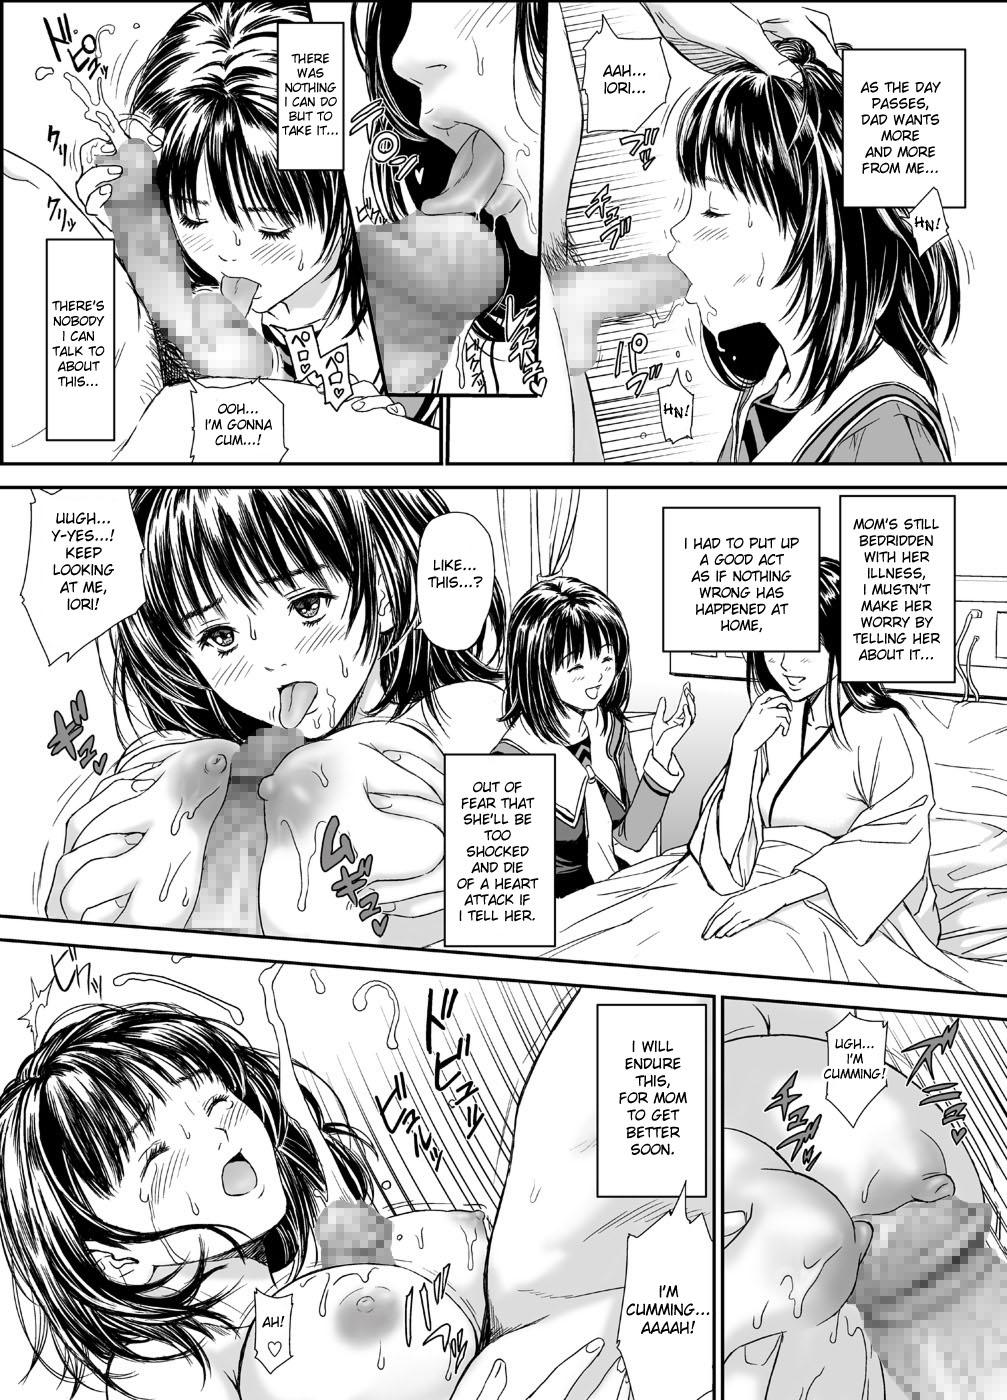 Top Iori - The Dark Side Of That Girl - Is Hot Girl Fucking - Page 12